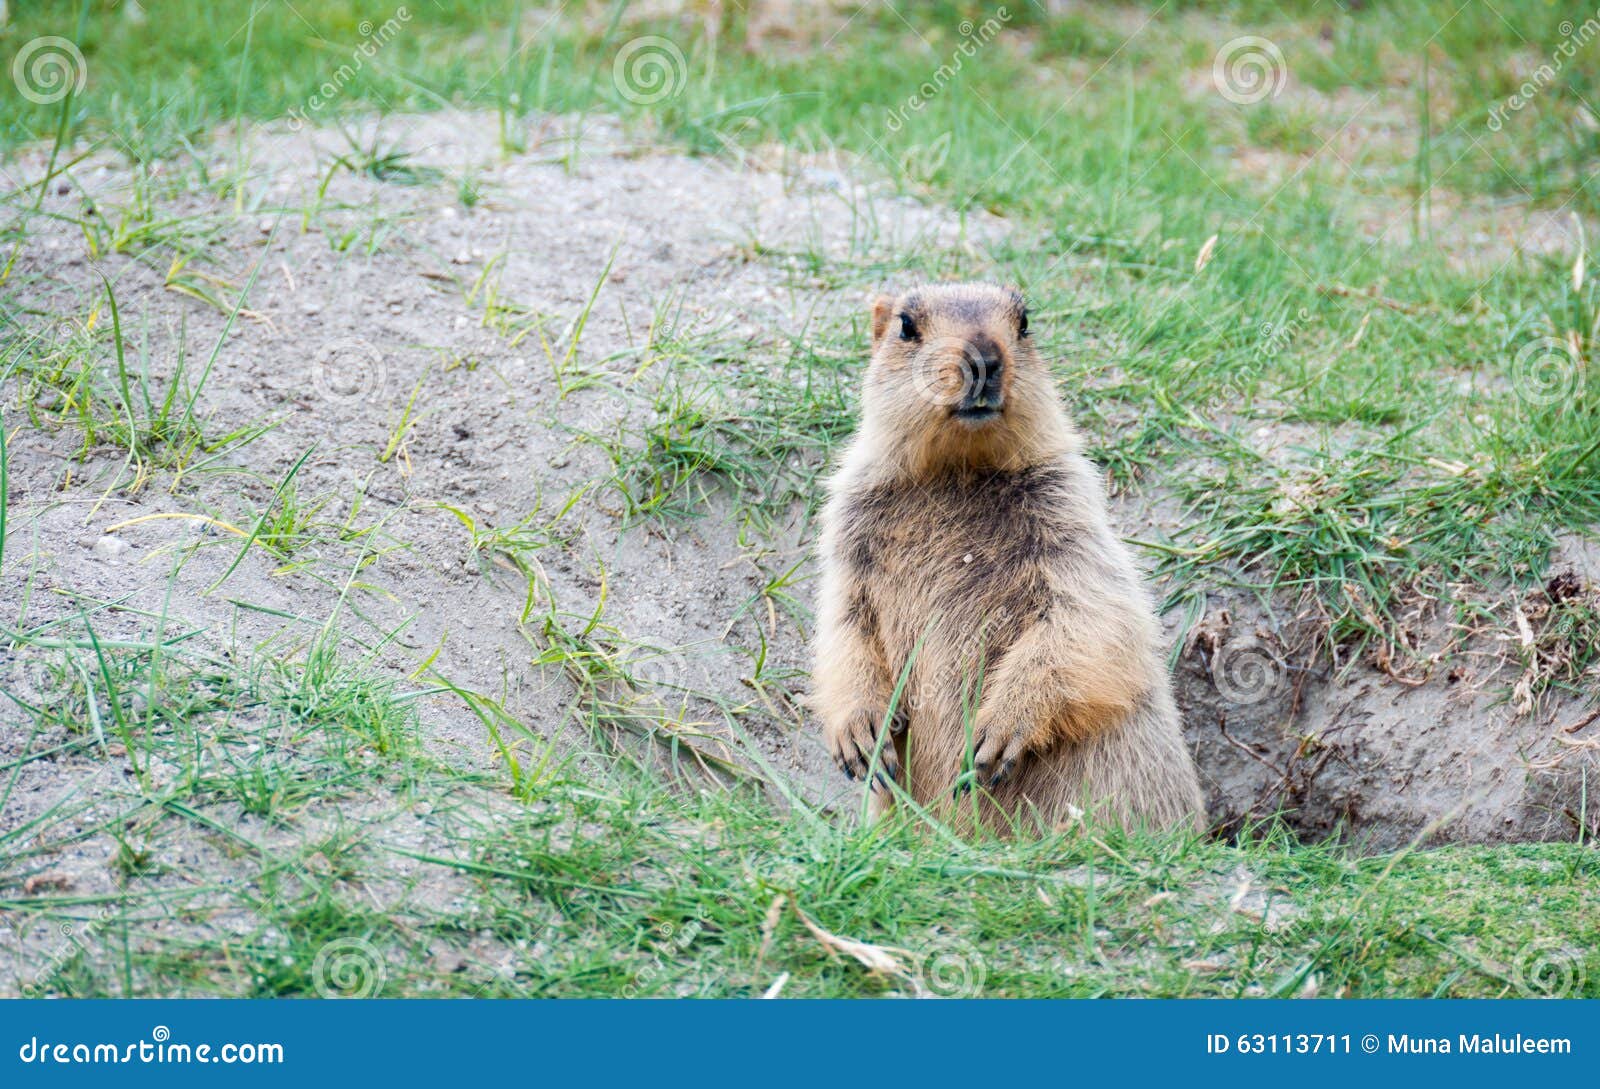 Animal in hole stock image. Image of rodent, nature, india - 63113711